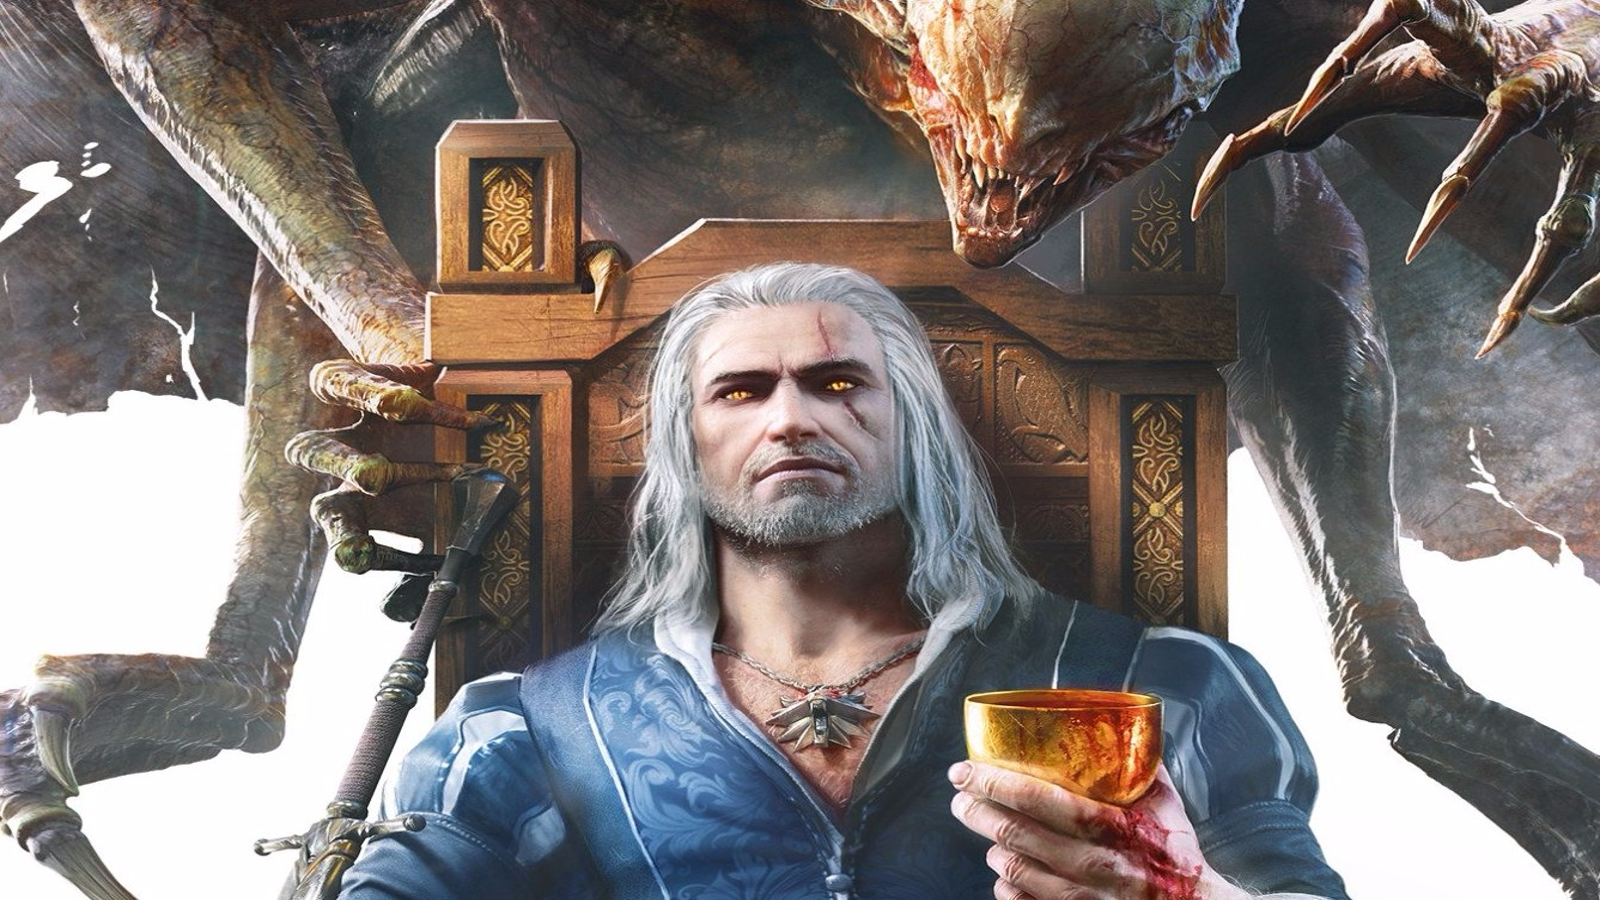 Jogo The Witcher 3 Wild Hunt Expansão Blood And Wine Ps4